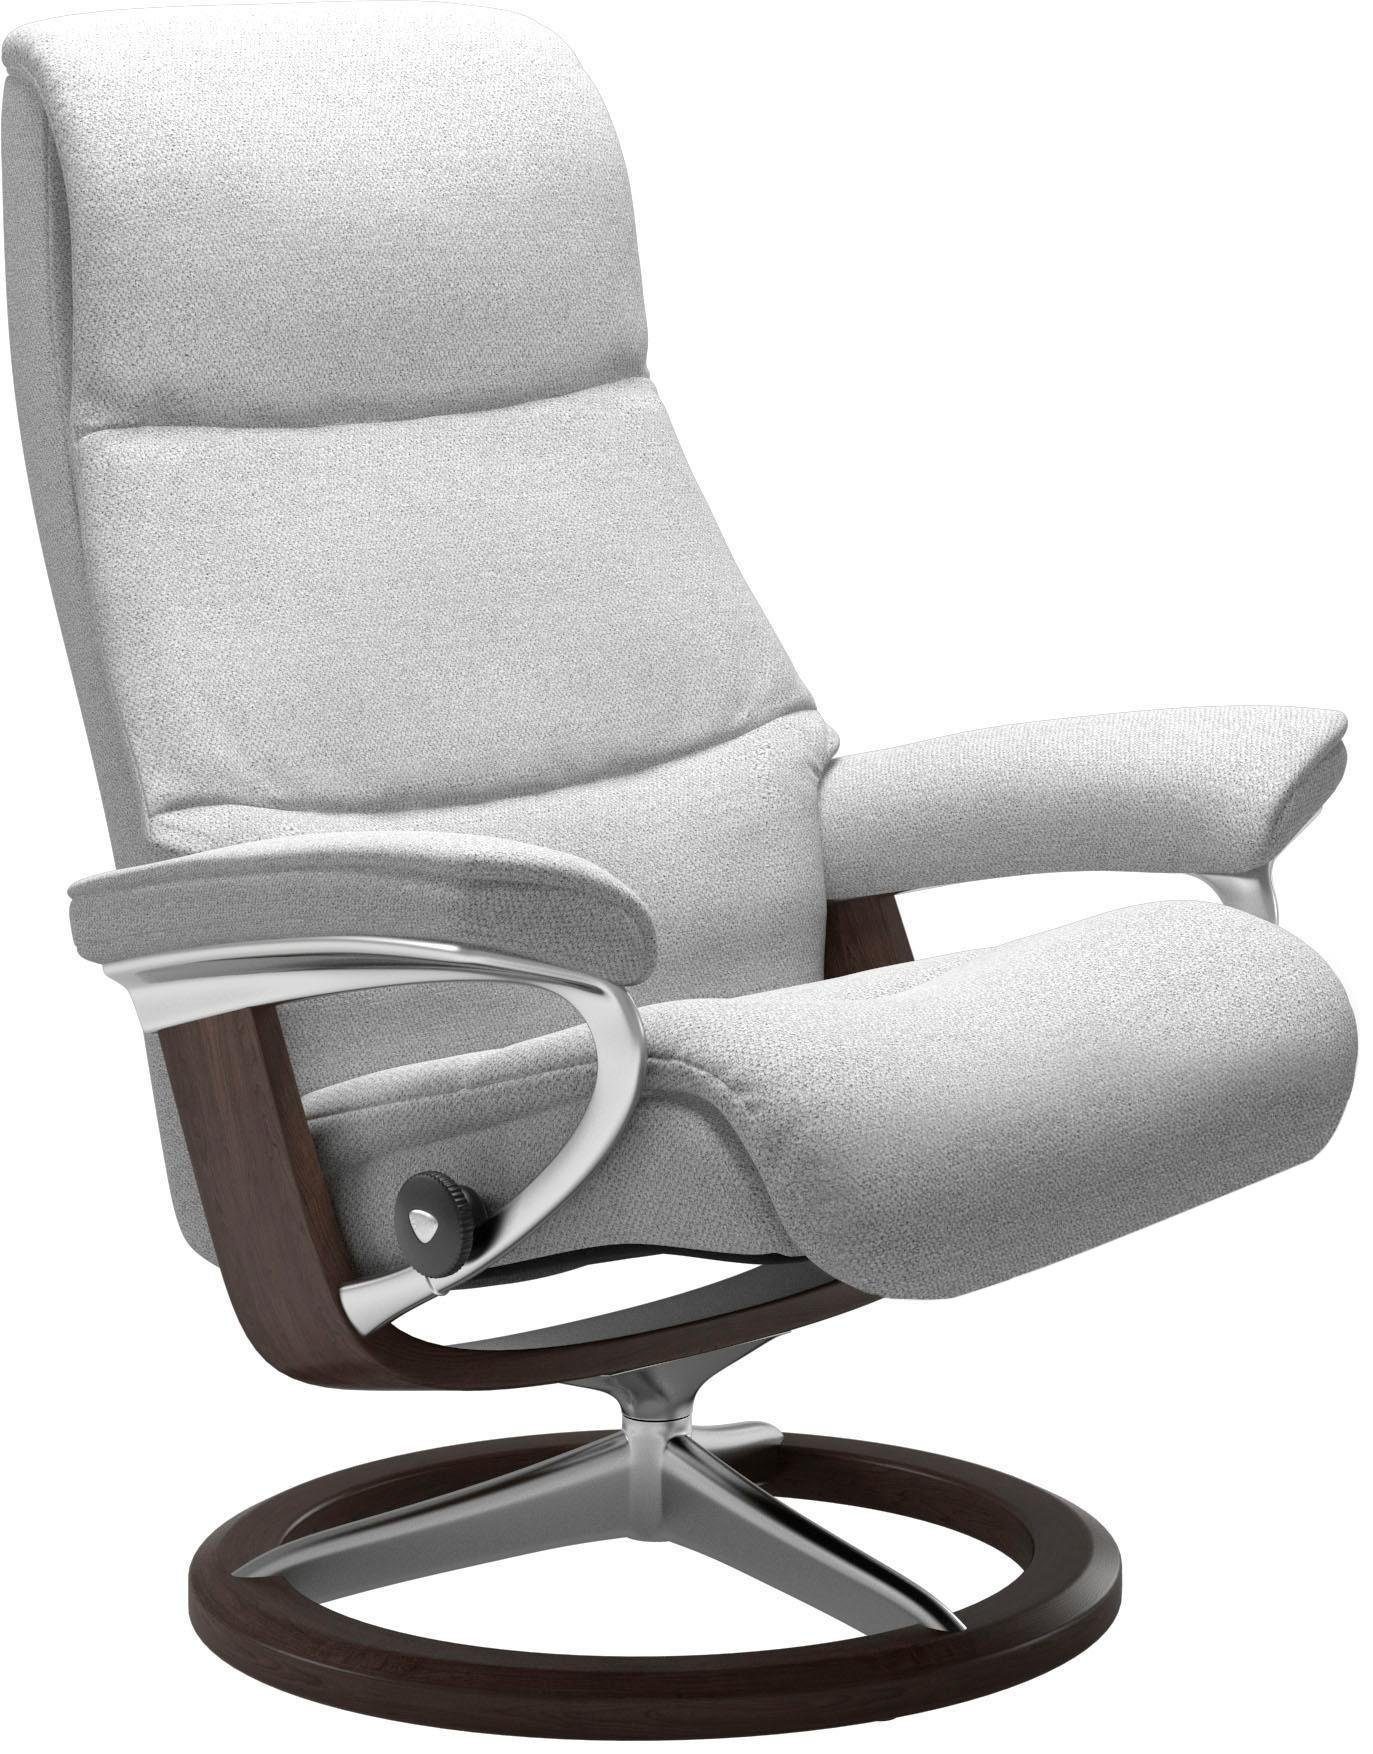 Stressless® Relaxsessel View, mit Signature L,Gestell Base, Wenge Größe